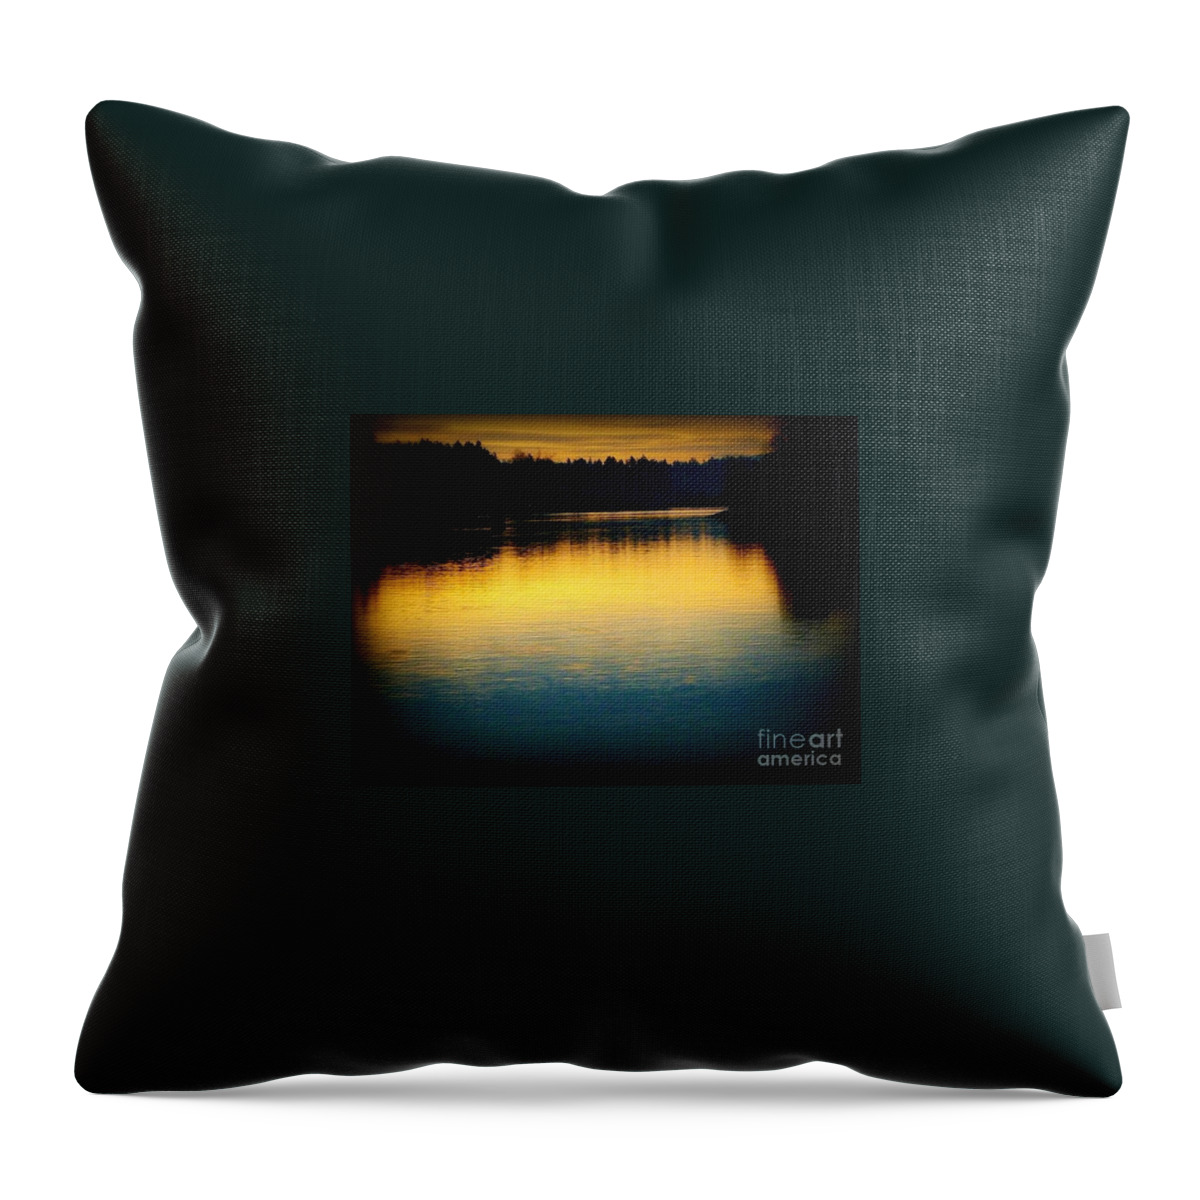 Scenic Throw Pillow featuring the photograph Good Morning Sunrise by Susan Garren